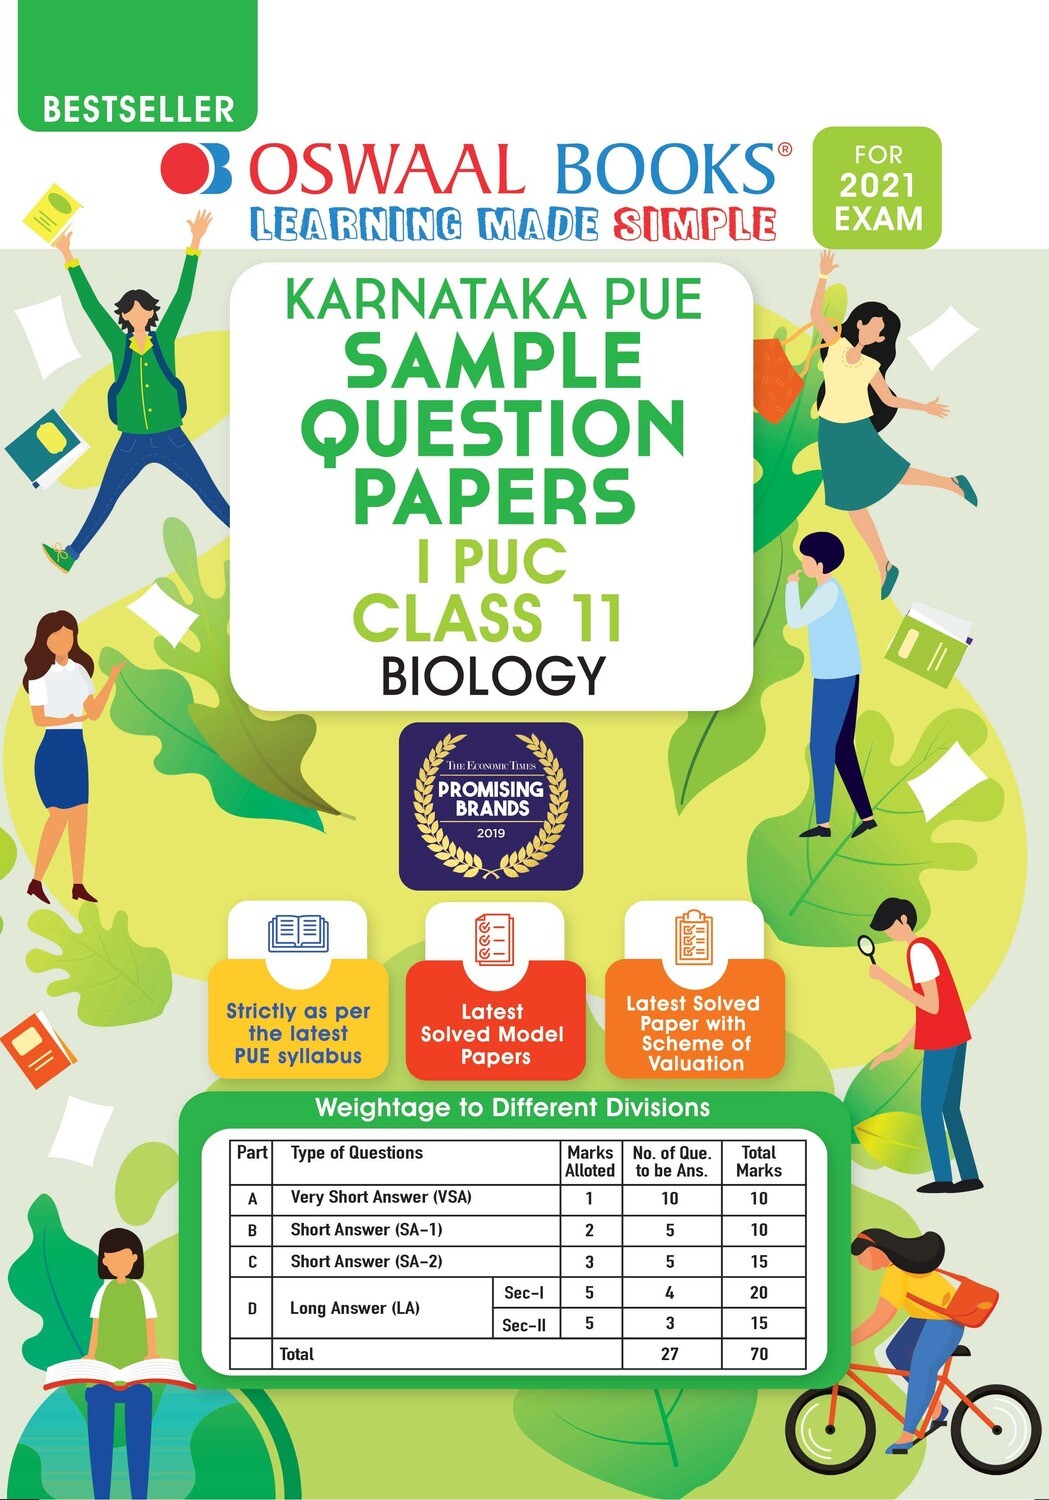 Buy e-book: Oswaal Karnataka PUE Sample Question Papers I PUC Class 11 Biology (For 2021 Exam): 9789390411320